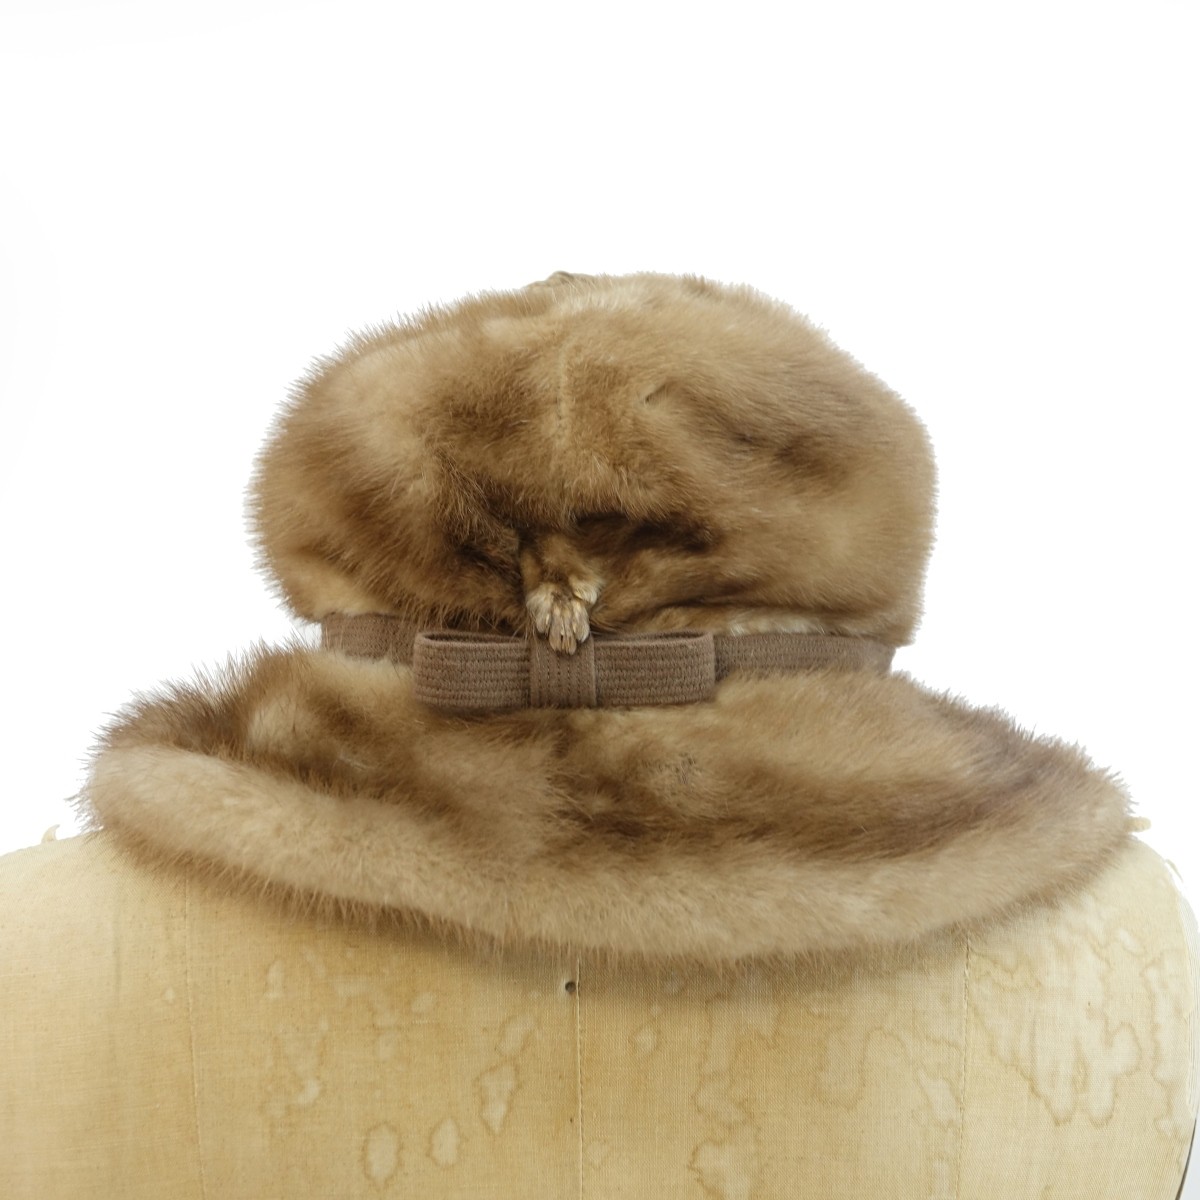 Two Mink Hats